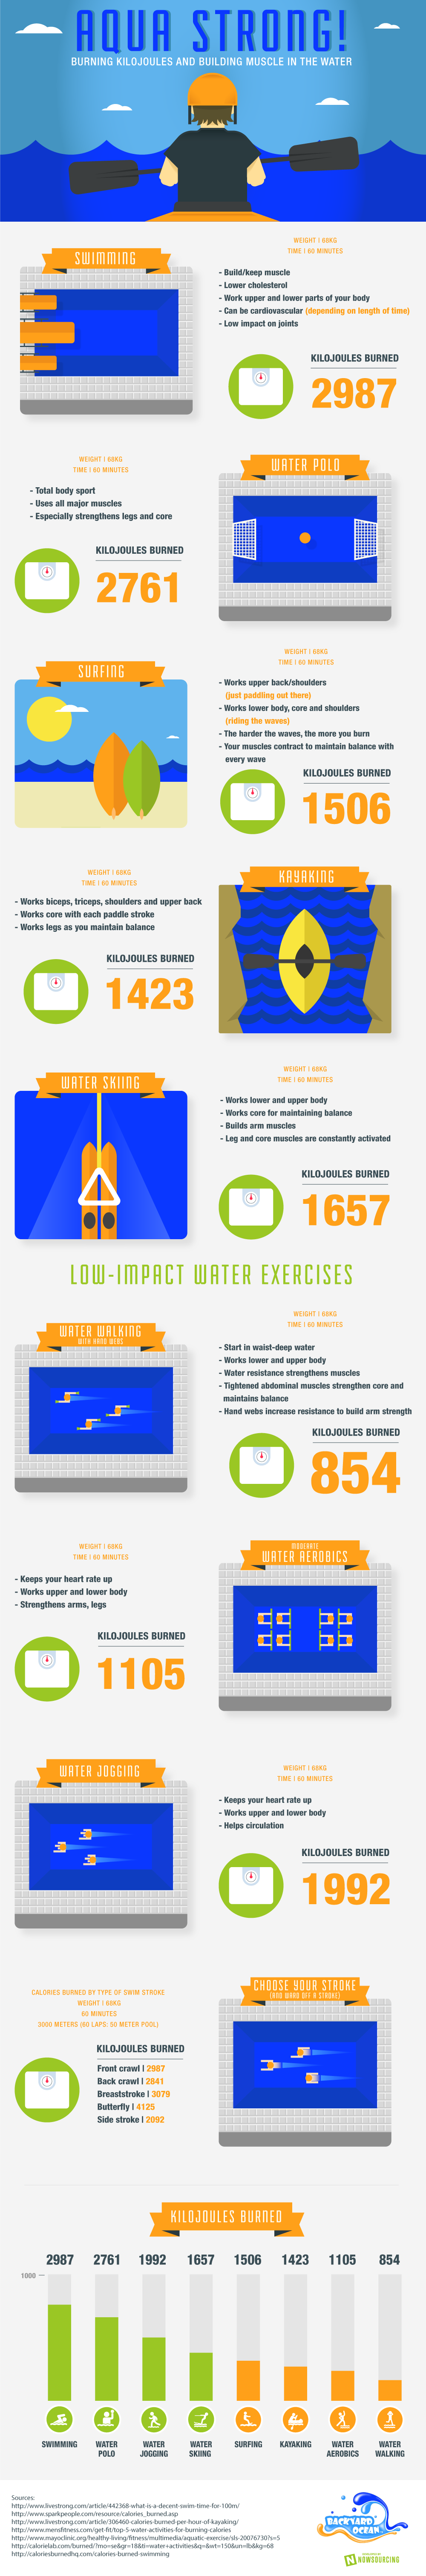 How Many Kilojoules Does Swimming Burn? [Infographic]